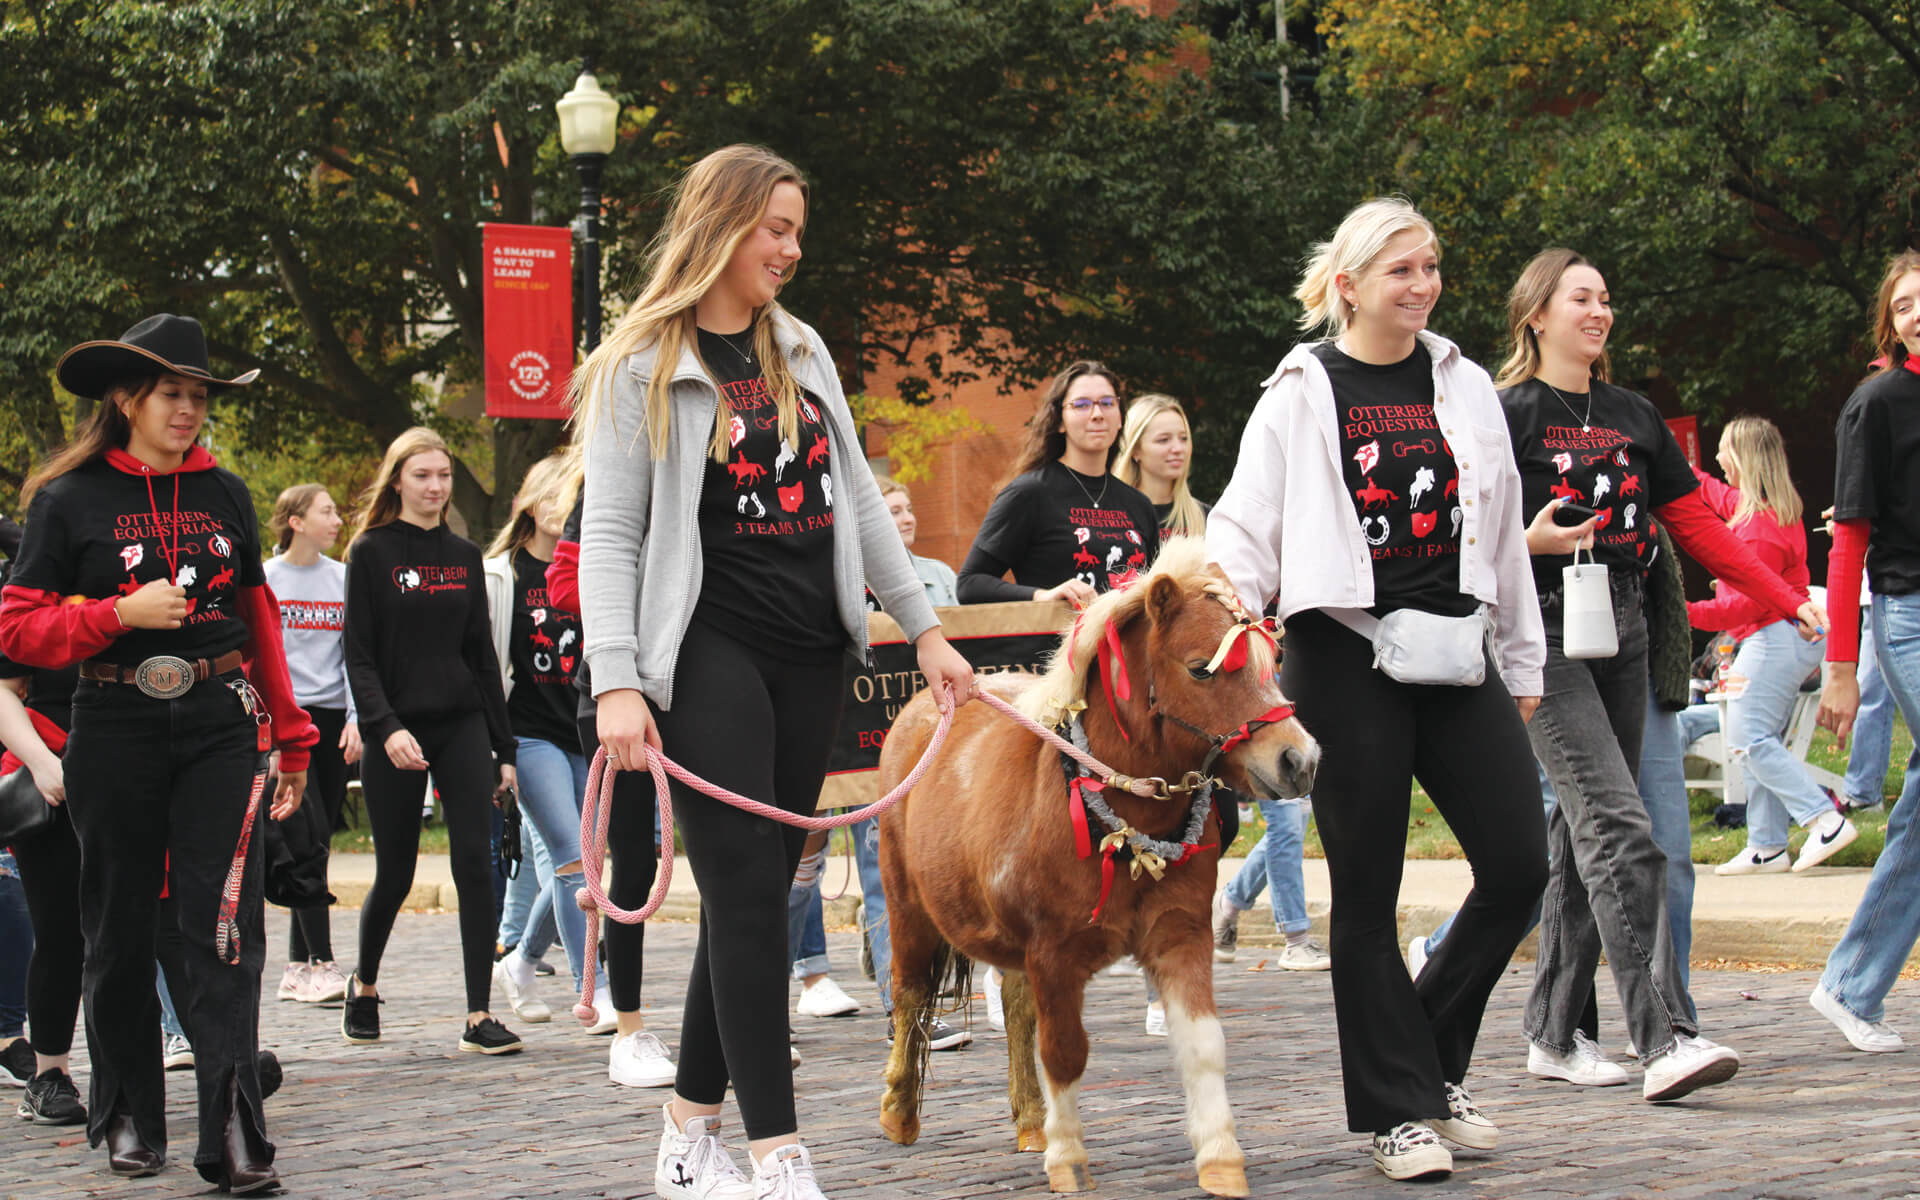 Members Of The Equine Team Join The Parade